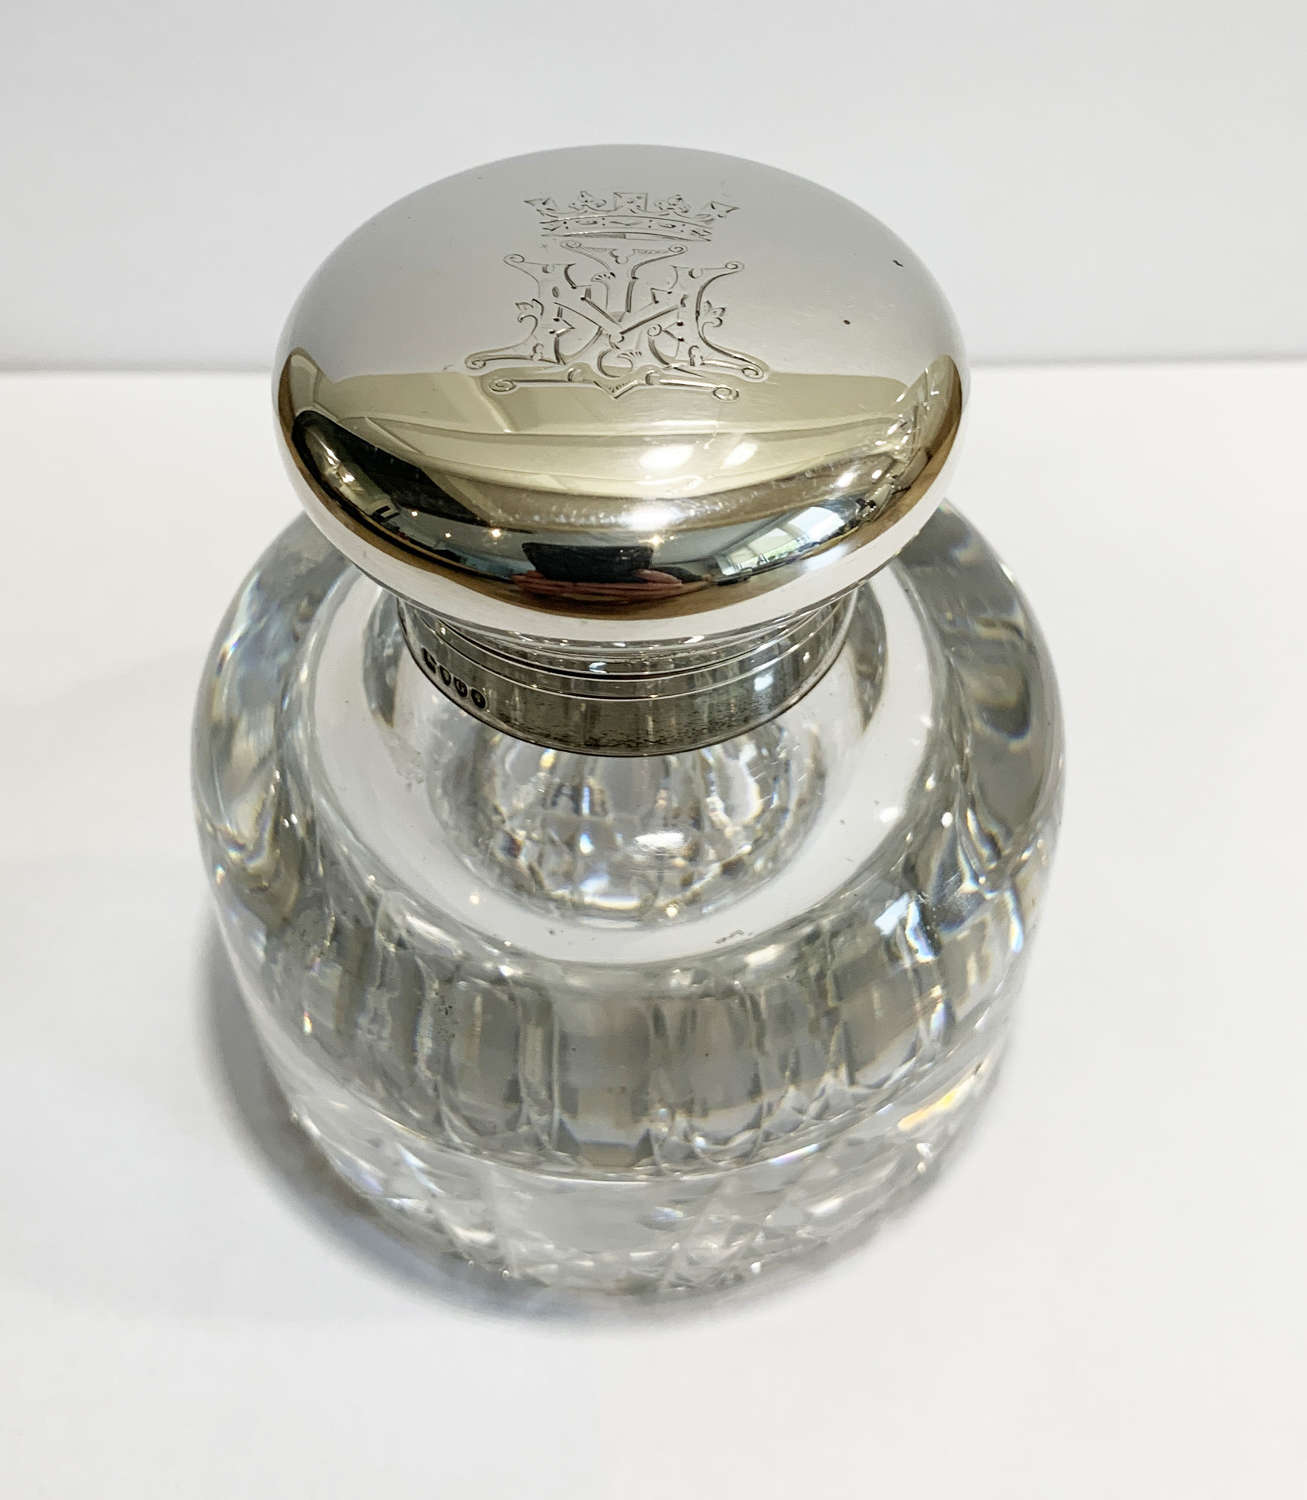 A silver and glass inkwell formerly owned by Princess Louise